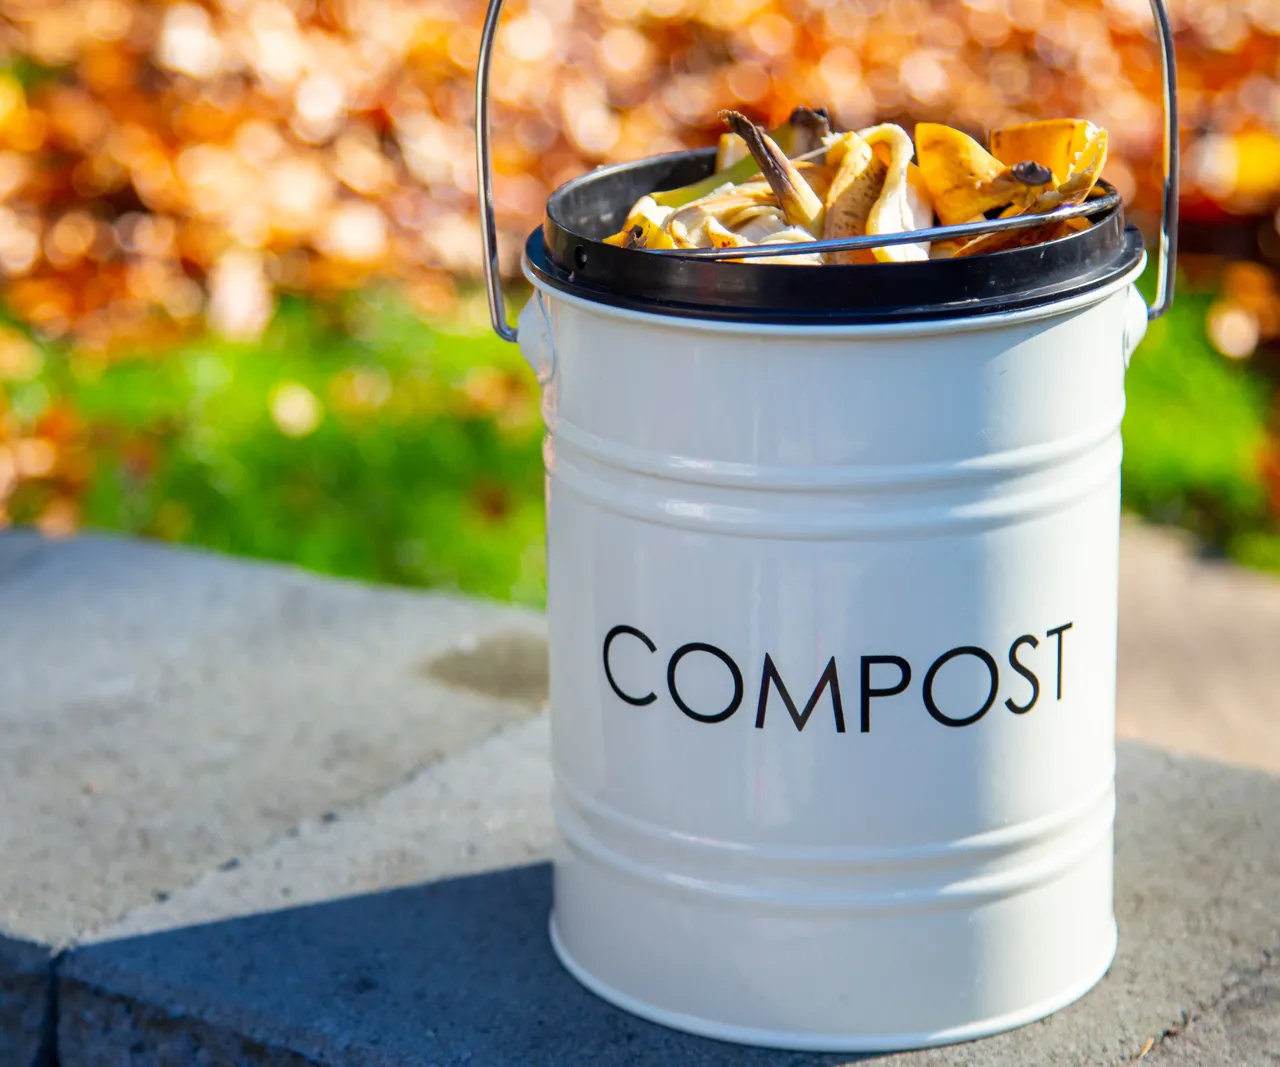 5 Expert Tips to Prevent Compost Odor